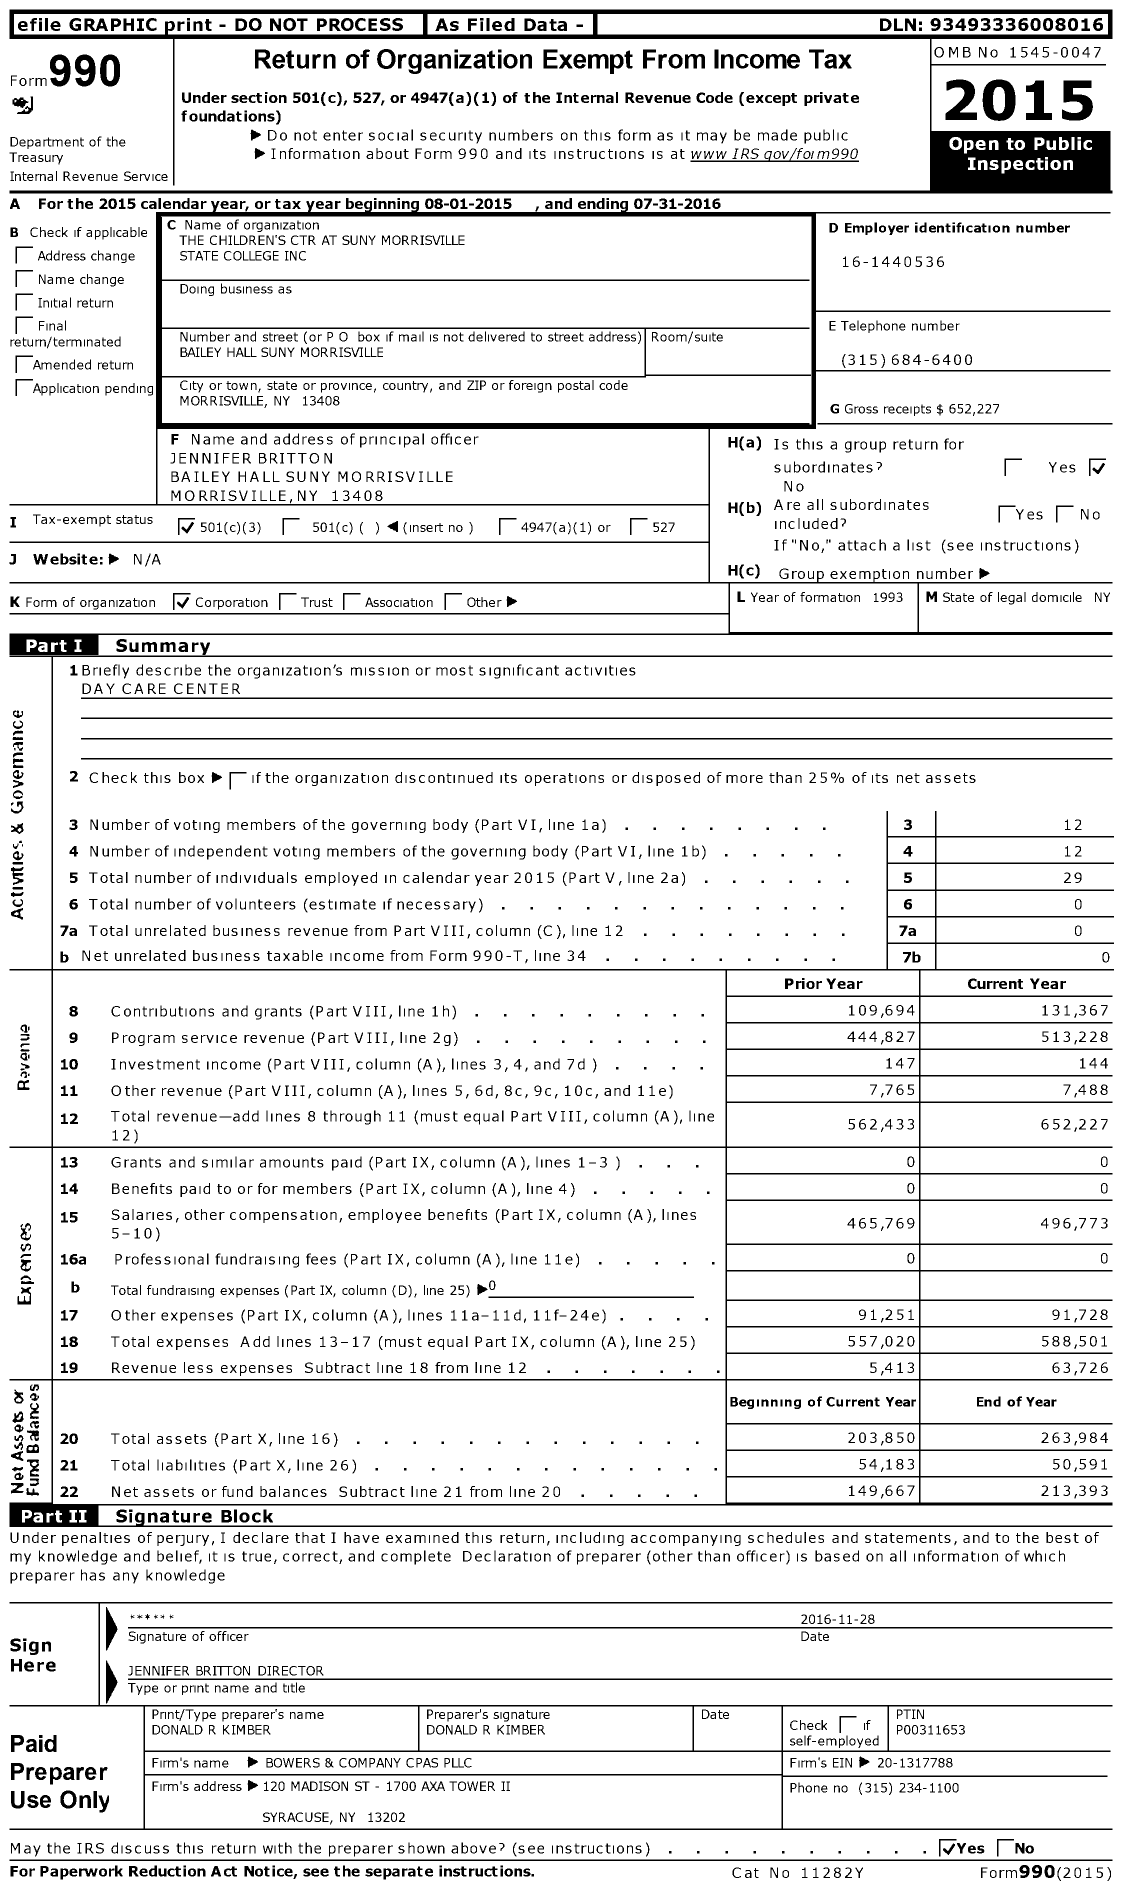 Image of first page of 2015 Form 990 for The Children's Center at Suny Morrisville State College